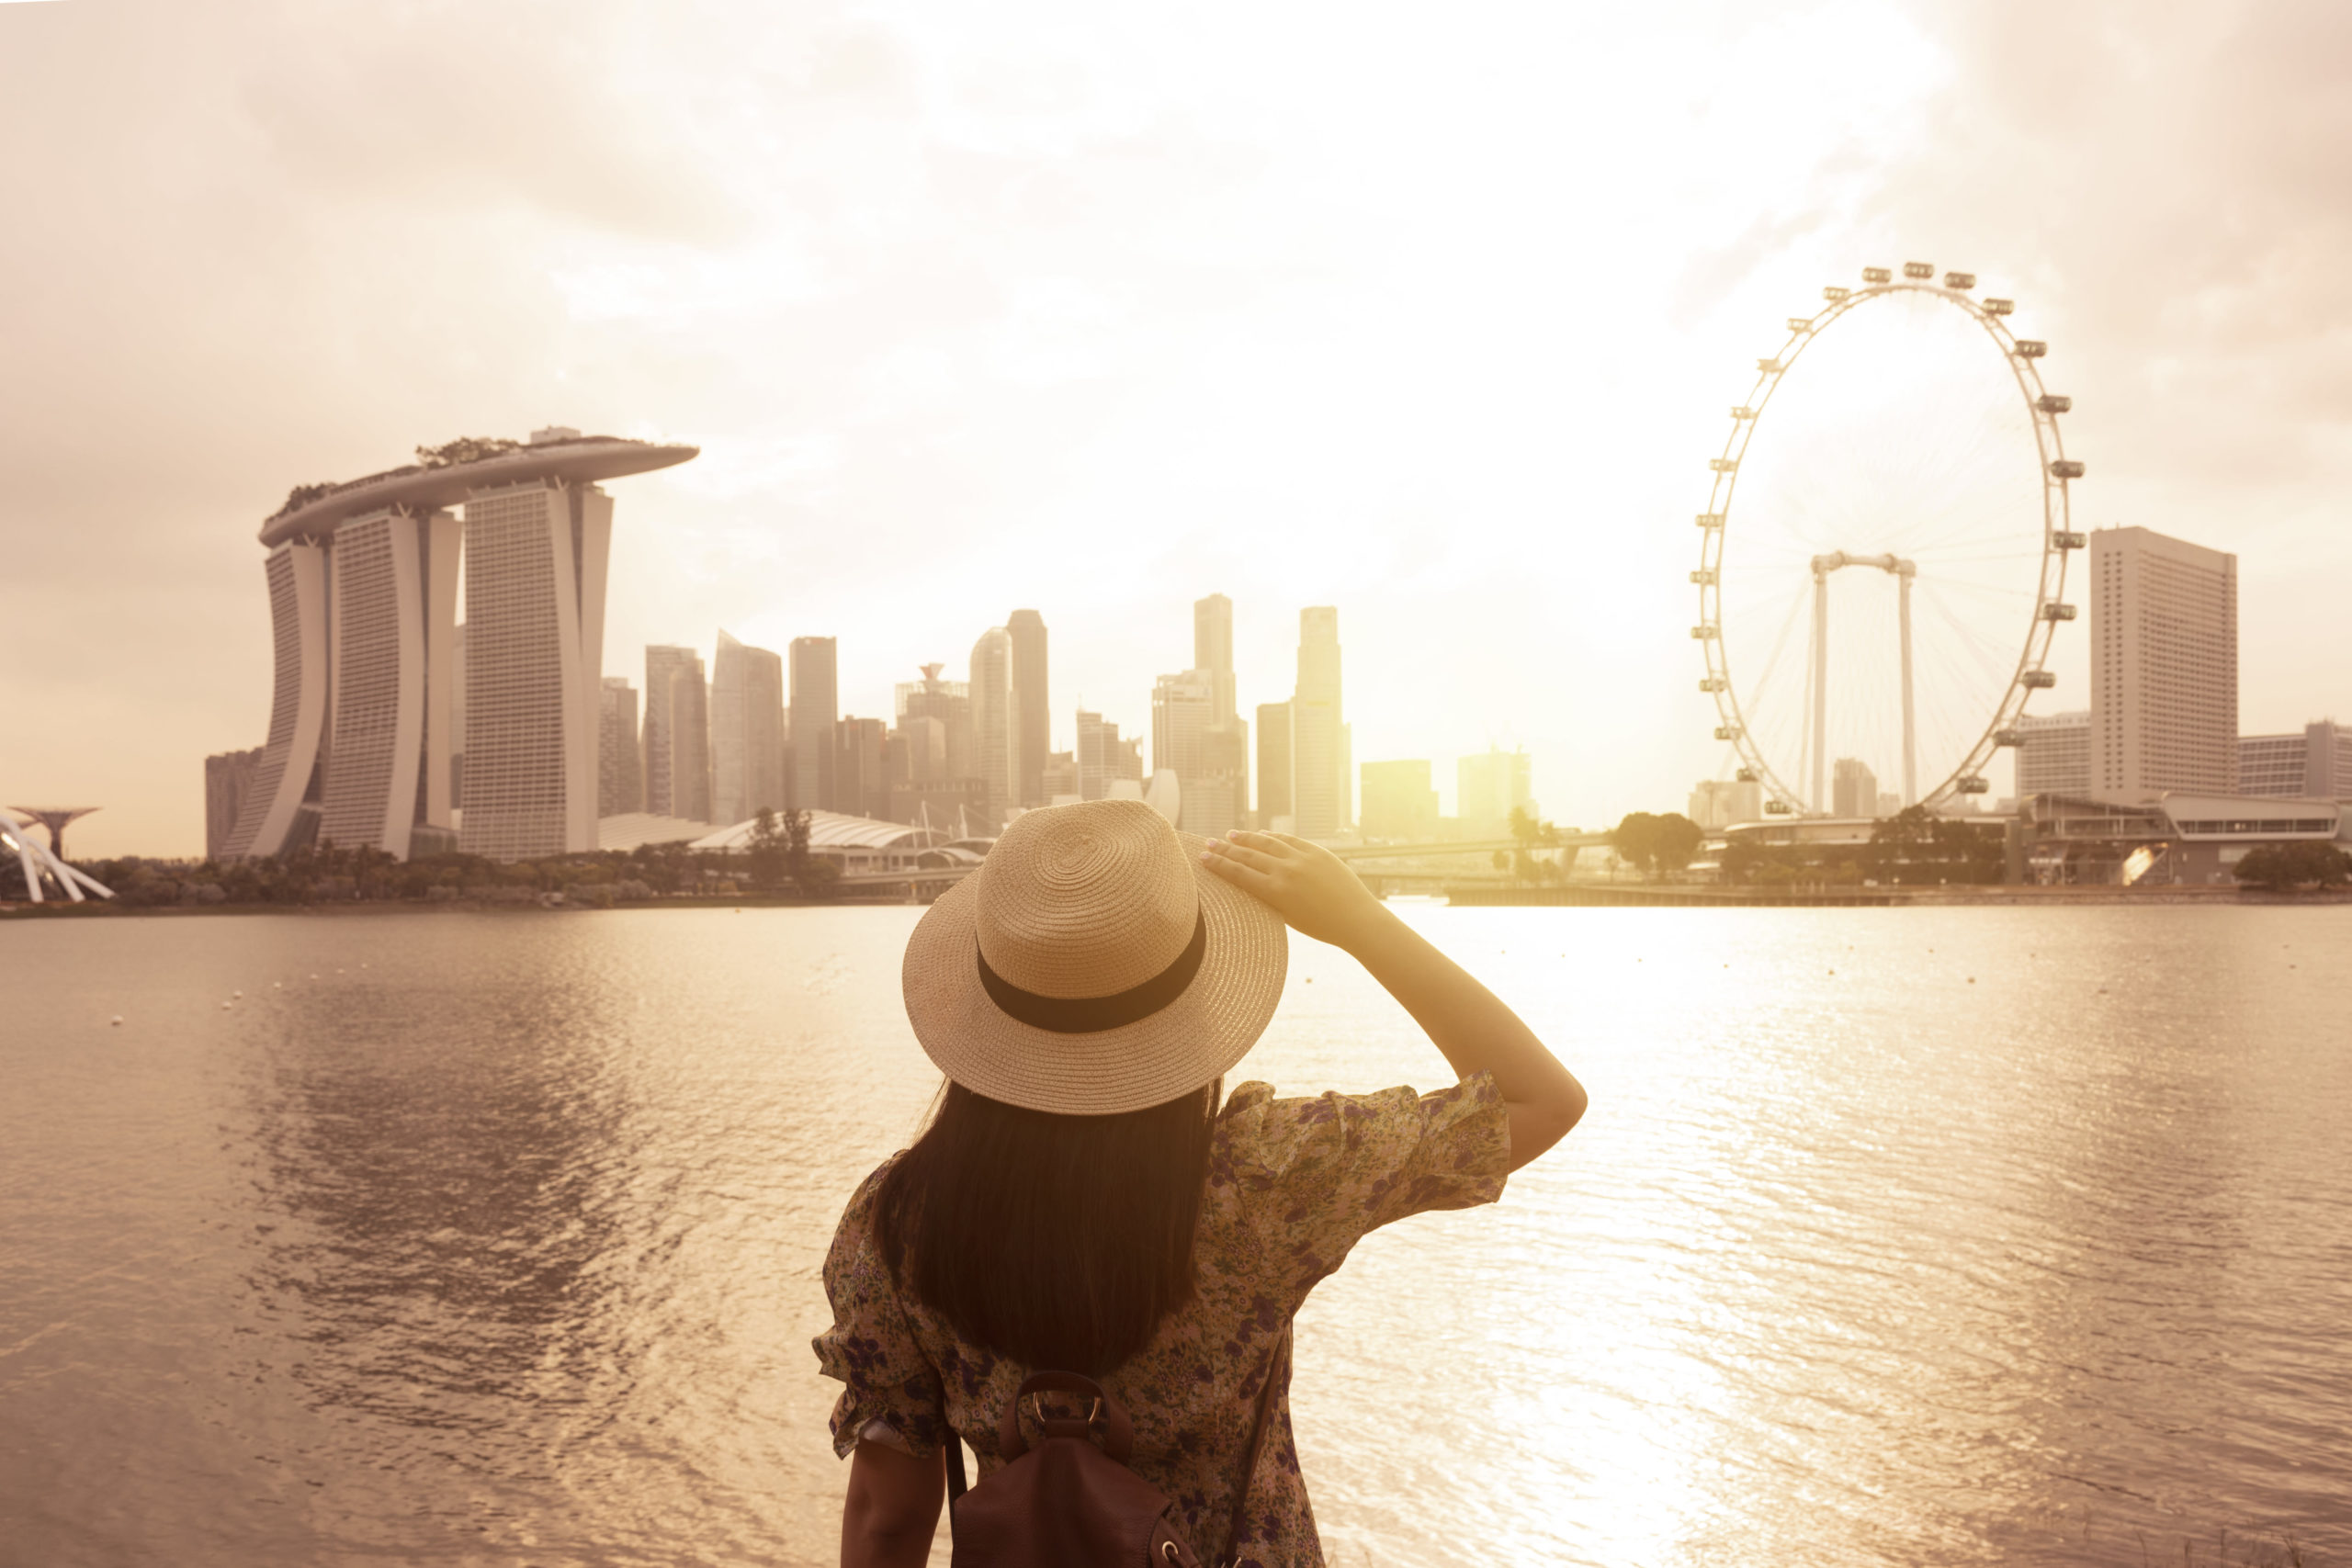 Singapore appears to be like to synthetic intelligence (AI) to spice up tourism